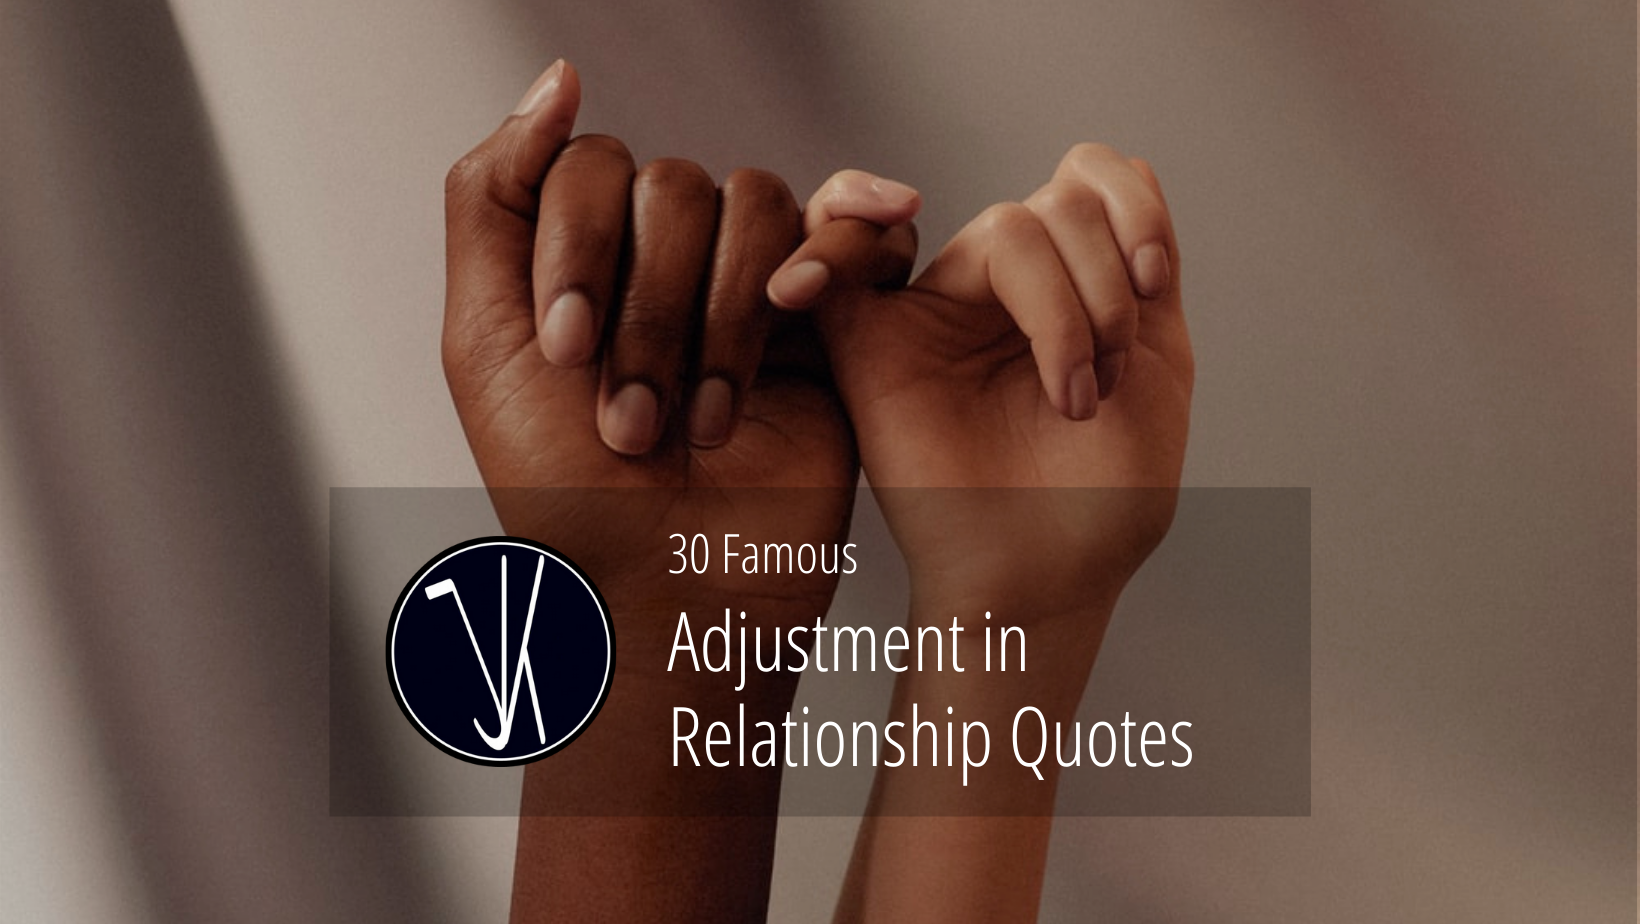 Adjustment in relationship quotes